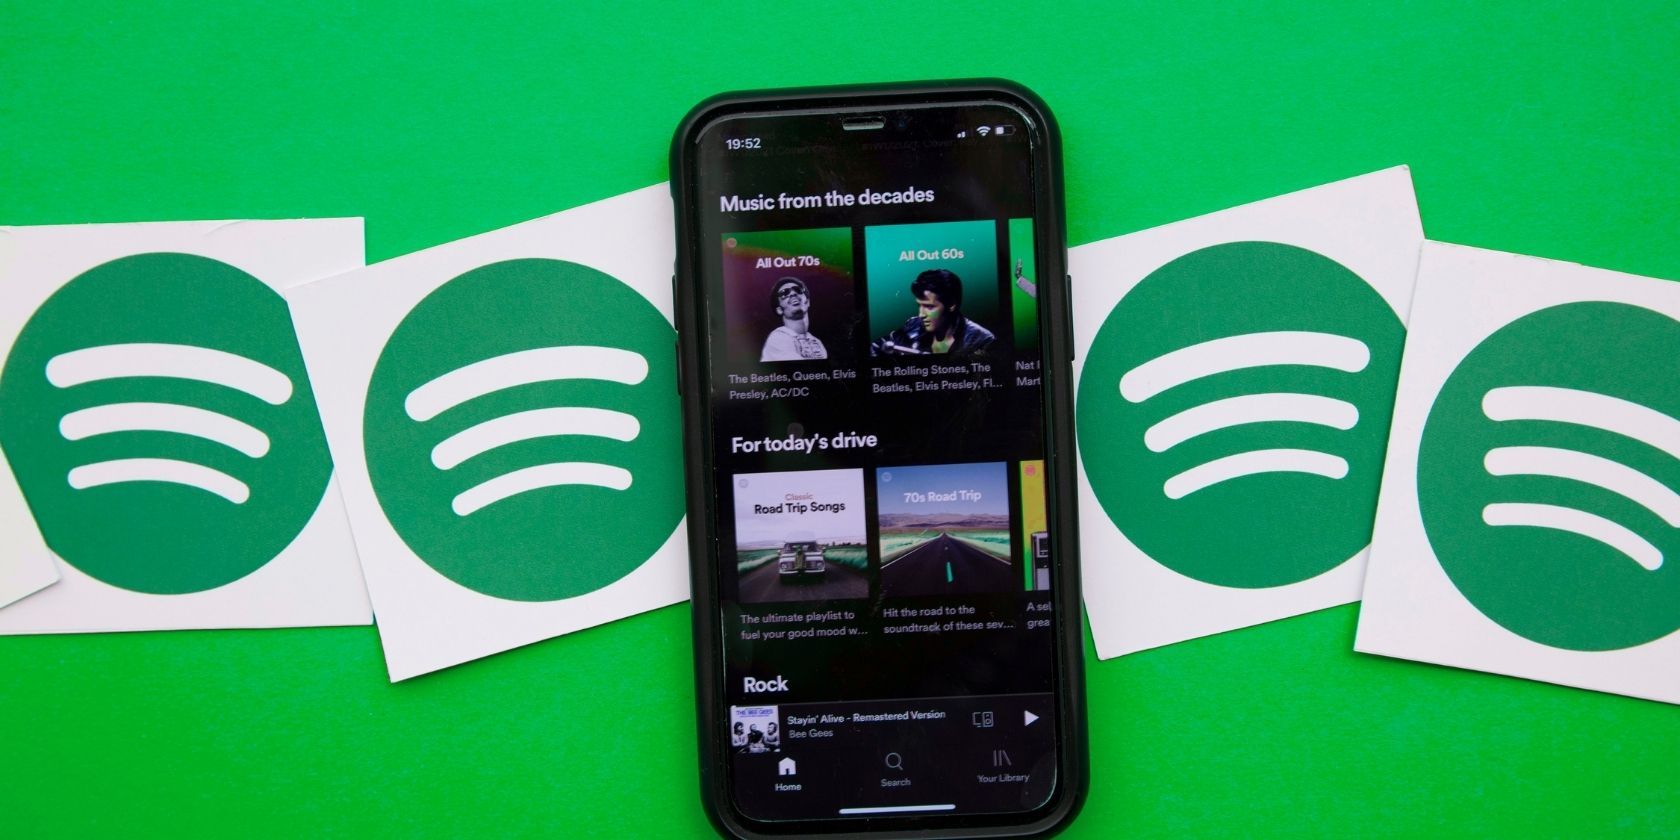 How to Use Spotify's New Hey Spotify Voice Controls